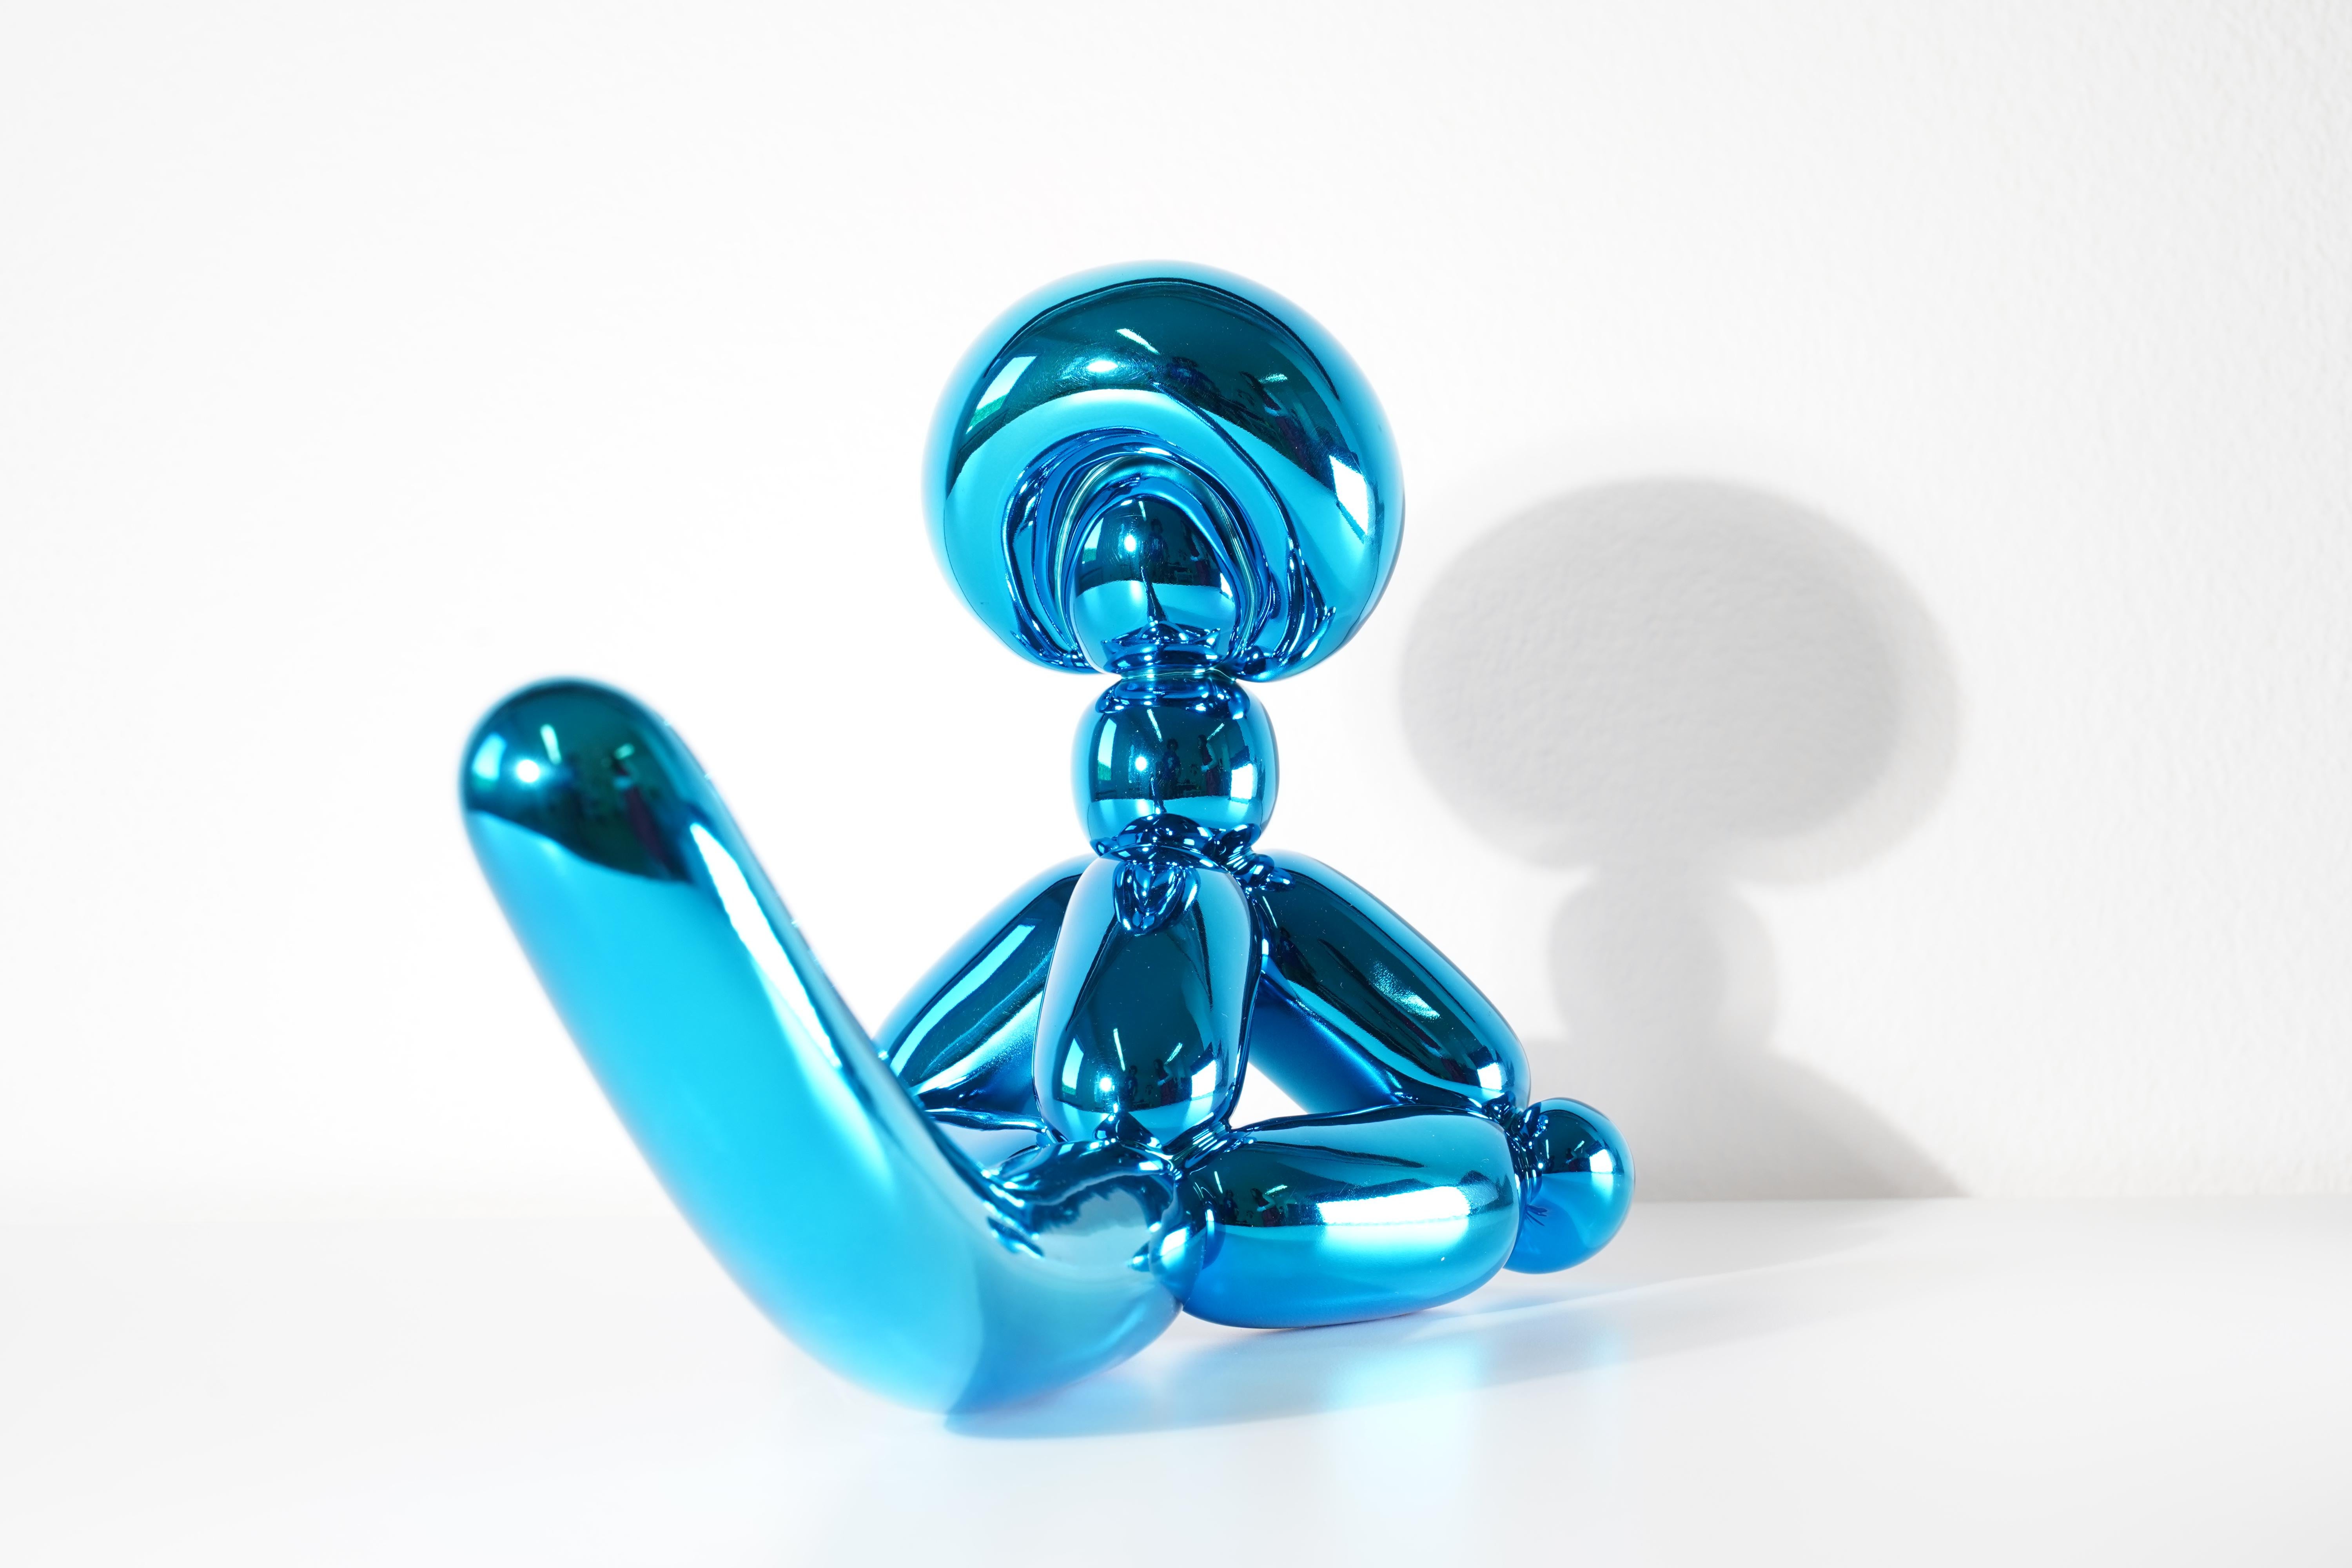 Balloon Monkey (Blue) - Jeff Koons, 21st Century, Contemporary, Porcelain, Sculpture, Decor, Limited Edition

Limoges porcelain with chromatic metalized coating
Edition of 999
Signed and numbered
In mint condition, as acquired from the